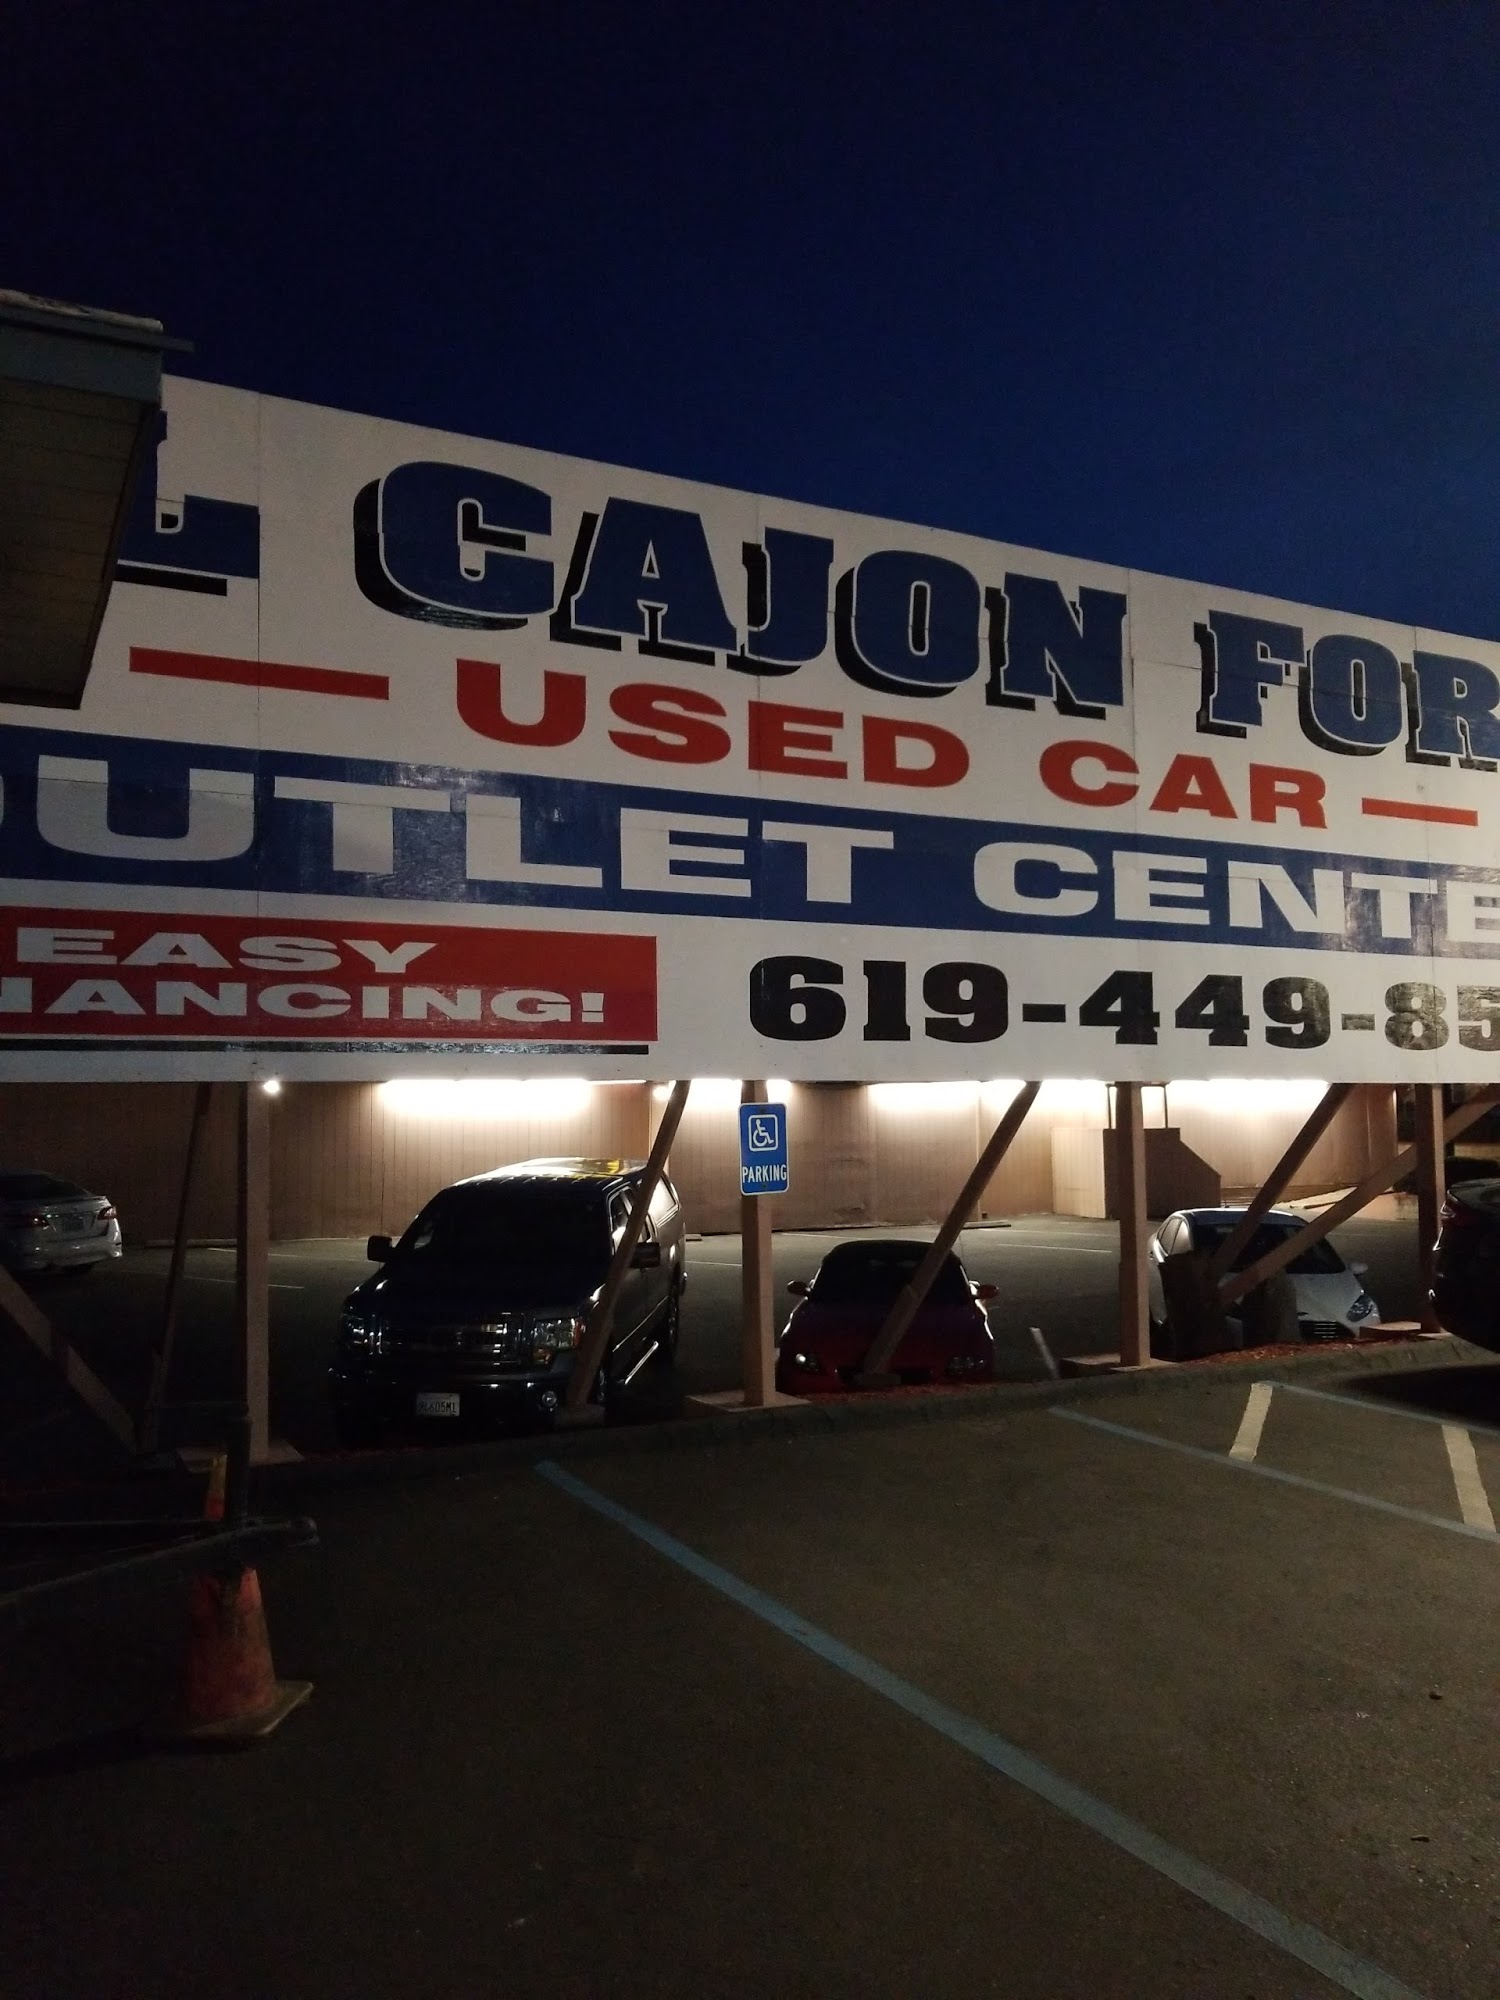 El Cajon Ford Used Car Outlet Center